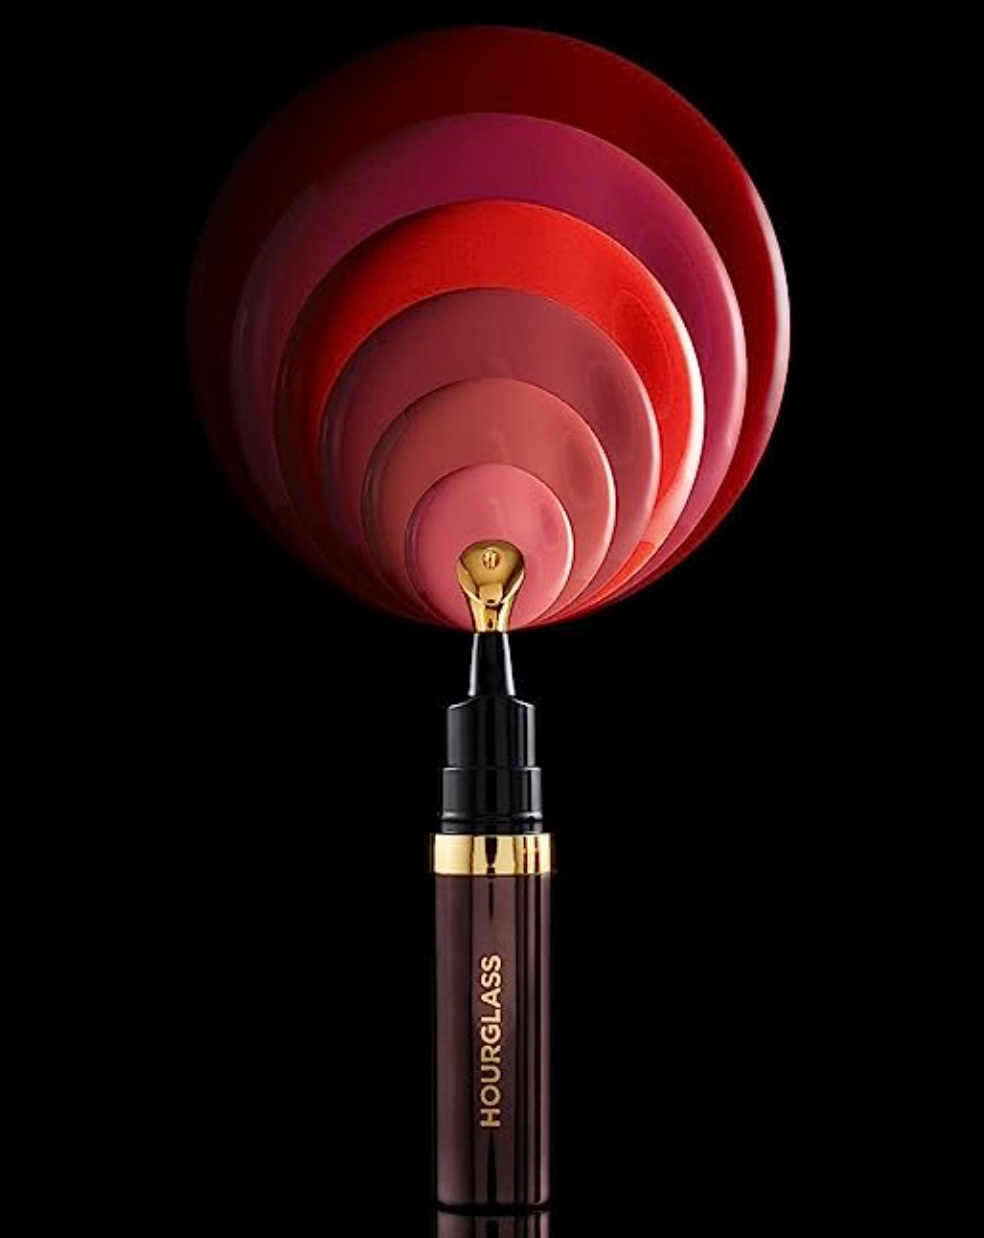 Hourglass No. 28 Lip Treatment Oil. Luxurious Hydrating and Anti-Aging Oil for Lips with Essential Oils and Vitamins. Vegan and Cruelty-Free